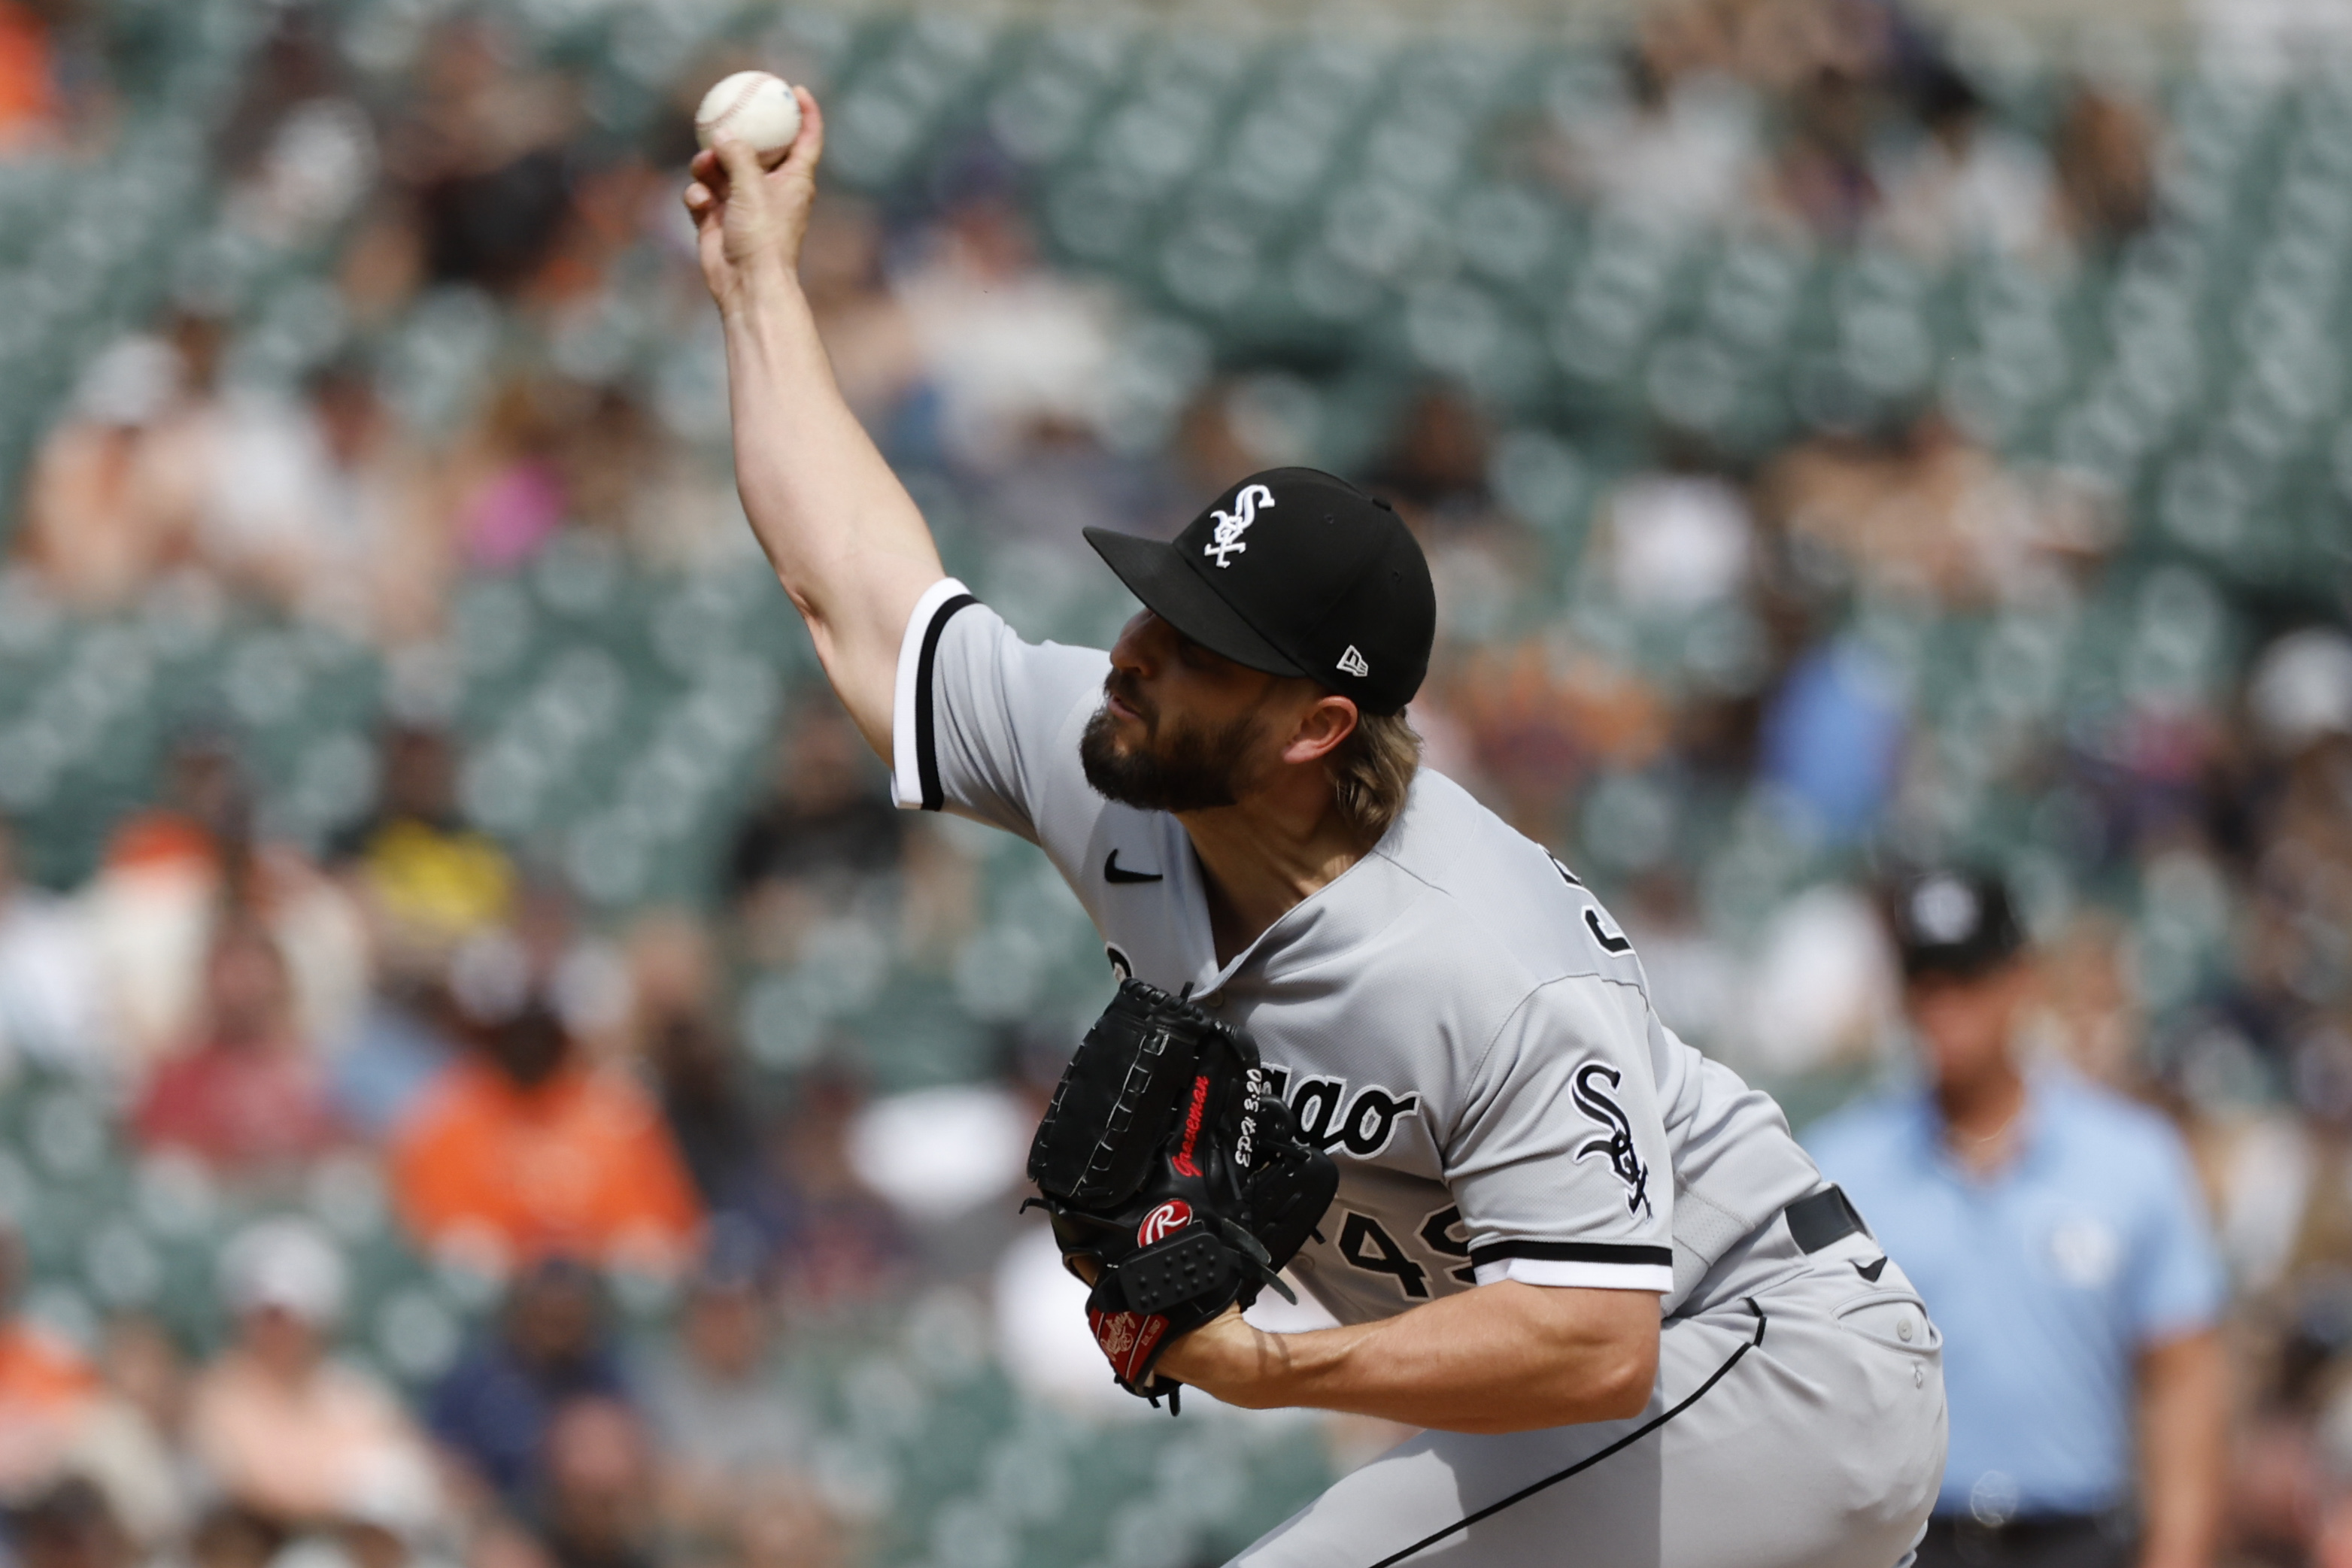 What's the best bullpen in baseball? Here's what Tigers' relievers